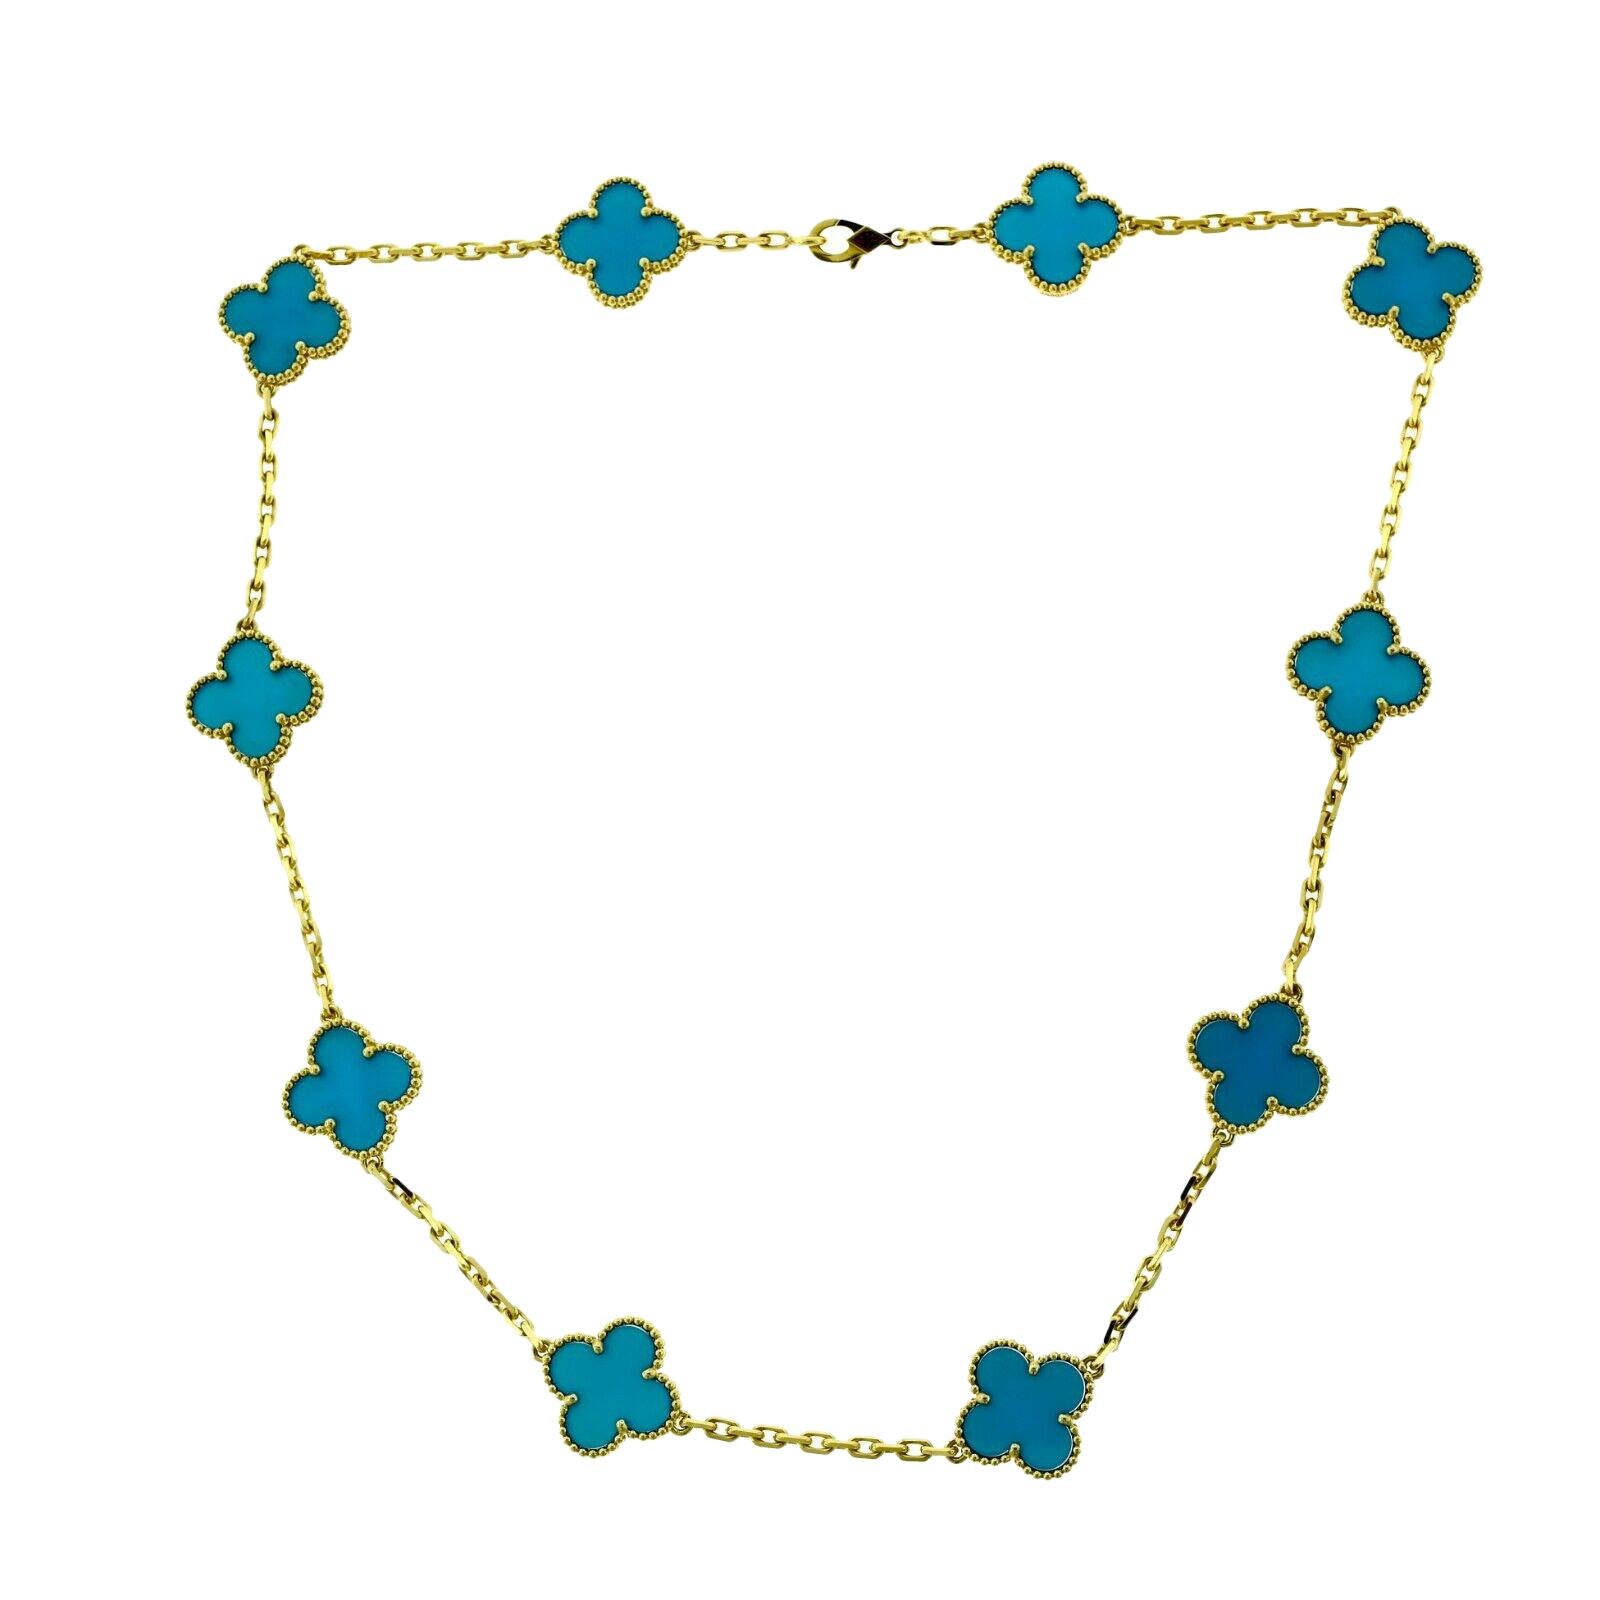 

Designer: Van Cleef & Arpels

Collection: Vintage Alhambra

Type: 10 Motif Necklace

Metal: Yellow Gold

Metal Purity: 18k

Stones: Blue Agate 

Motif Dimensions: approx. 12.54 x 14.67 mm

Total Item Weight (grams): 23.6

Necklace Length: 16